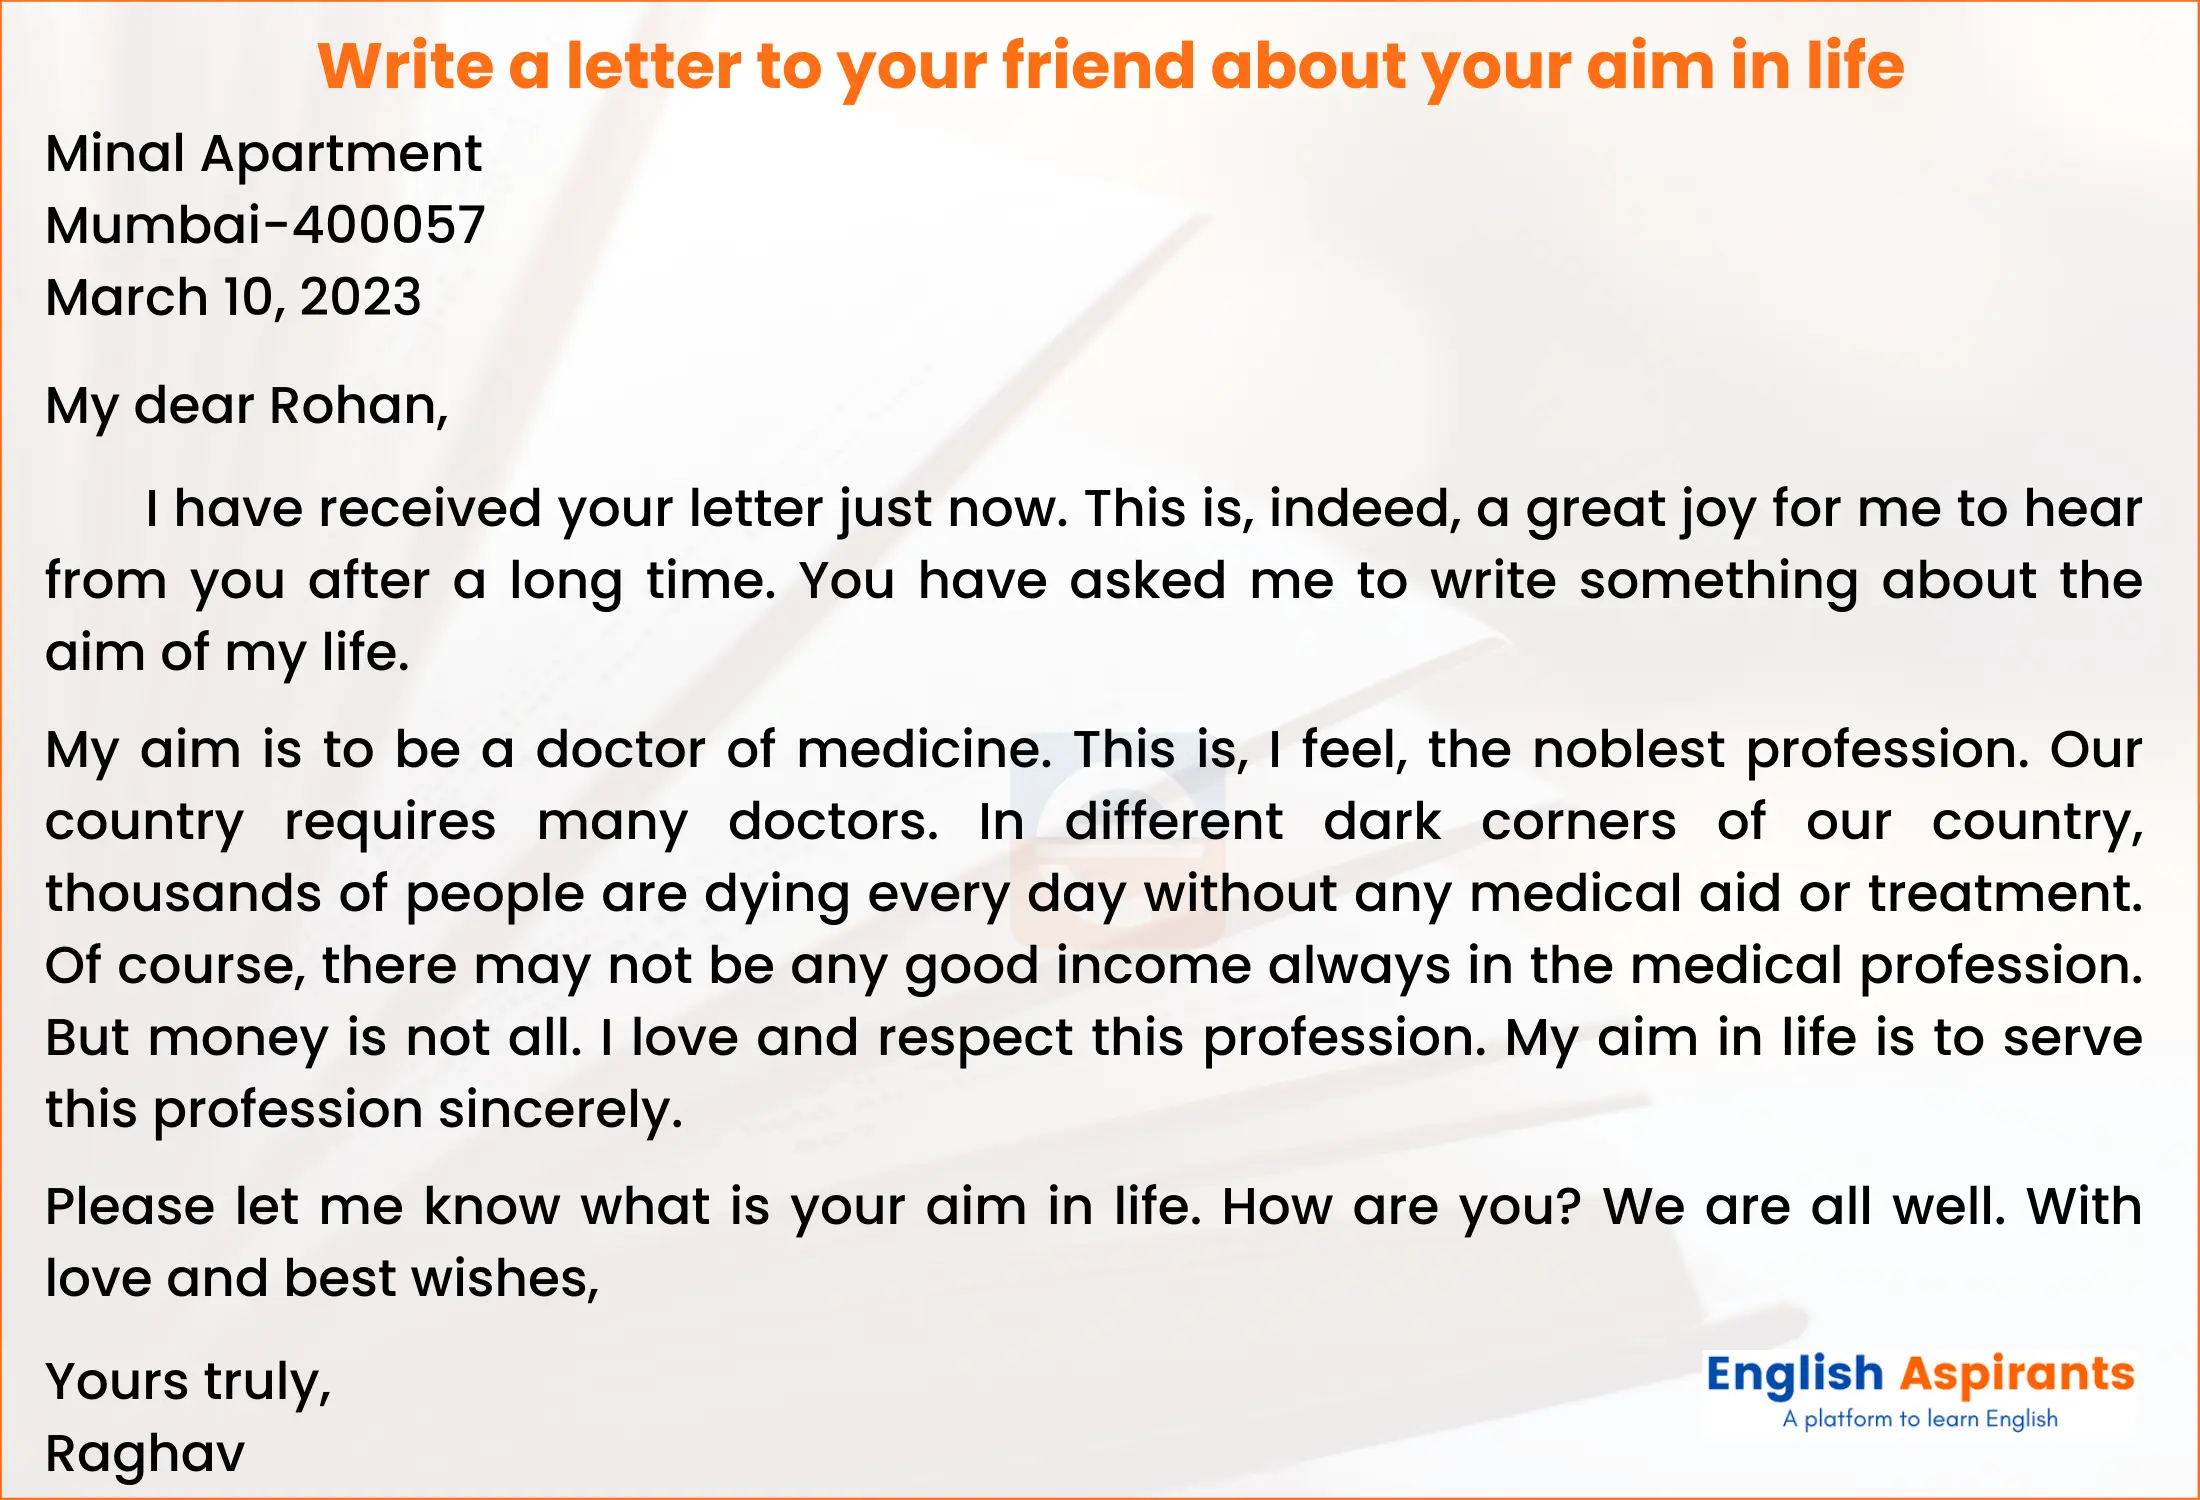 Write a Letter to Your Friend About Your Aim in Life